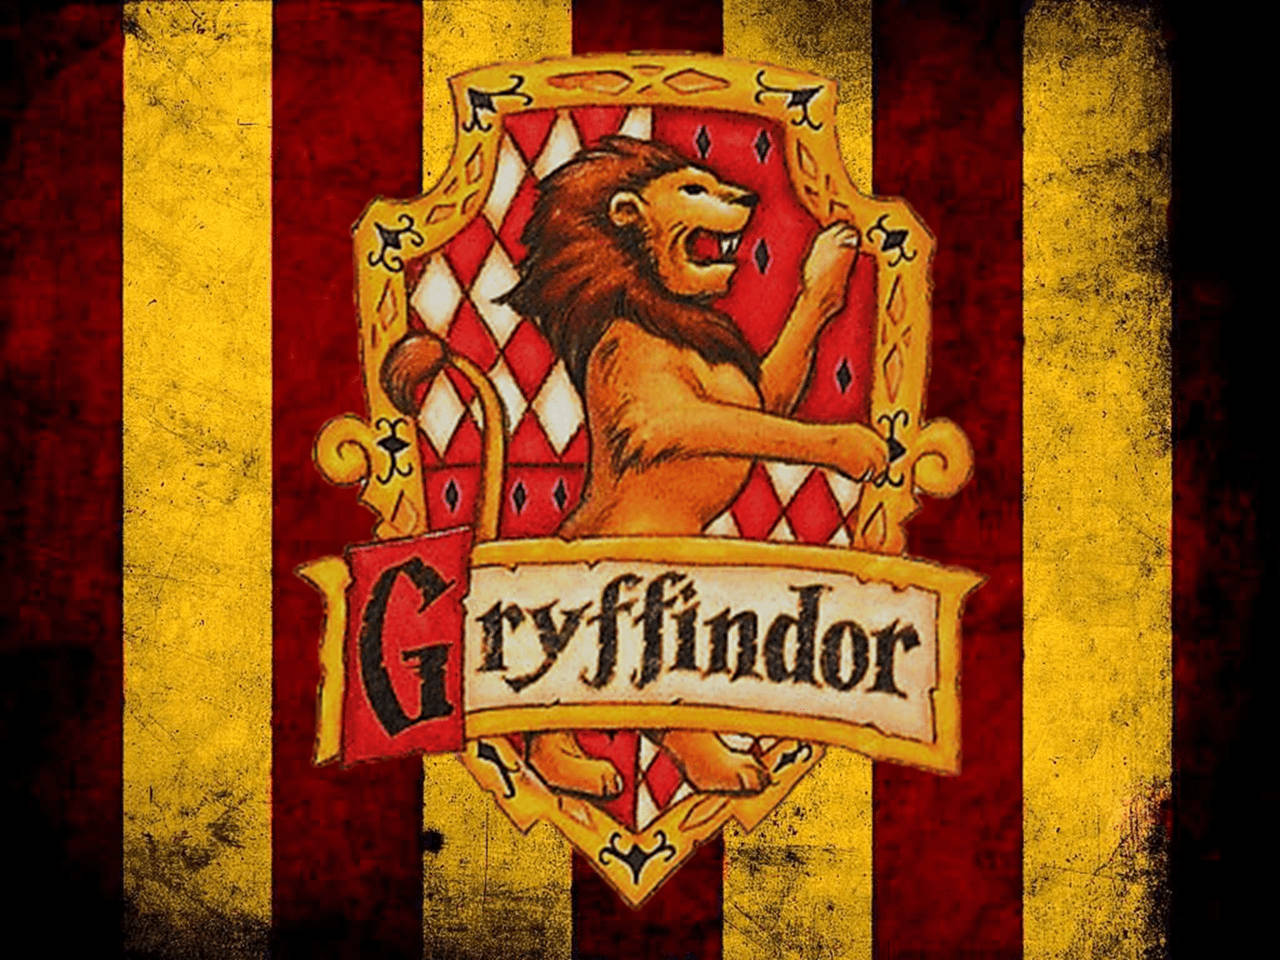 Gryffindor» 1080P, 2k, 4k HD wallpapers, backgrounds free download | Rare  Gallery